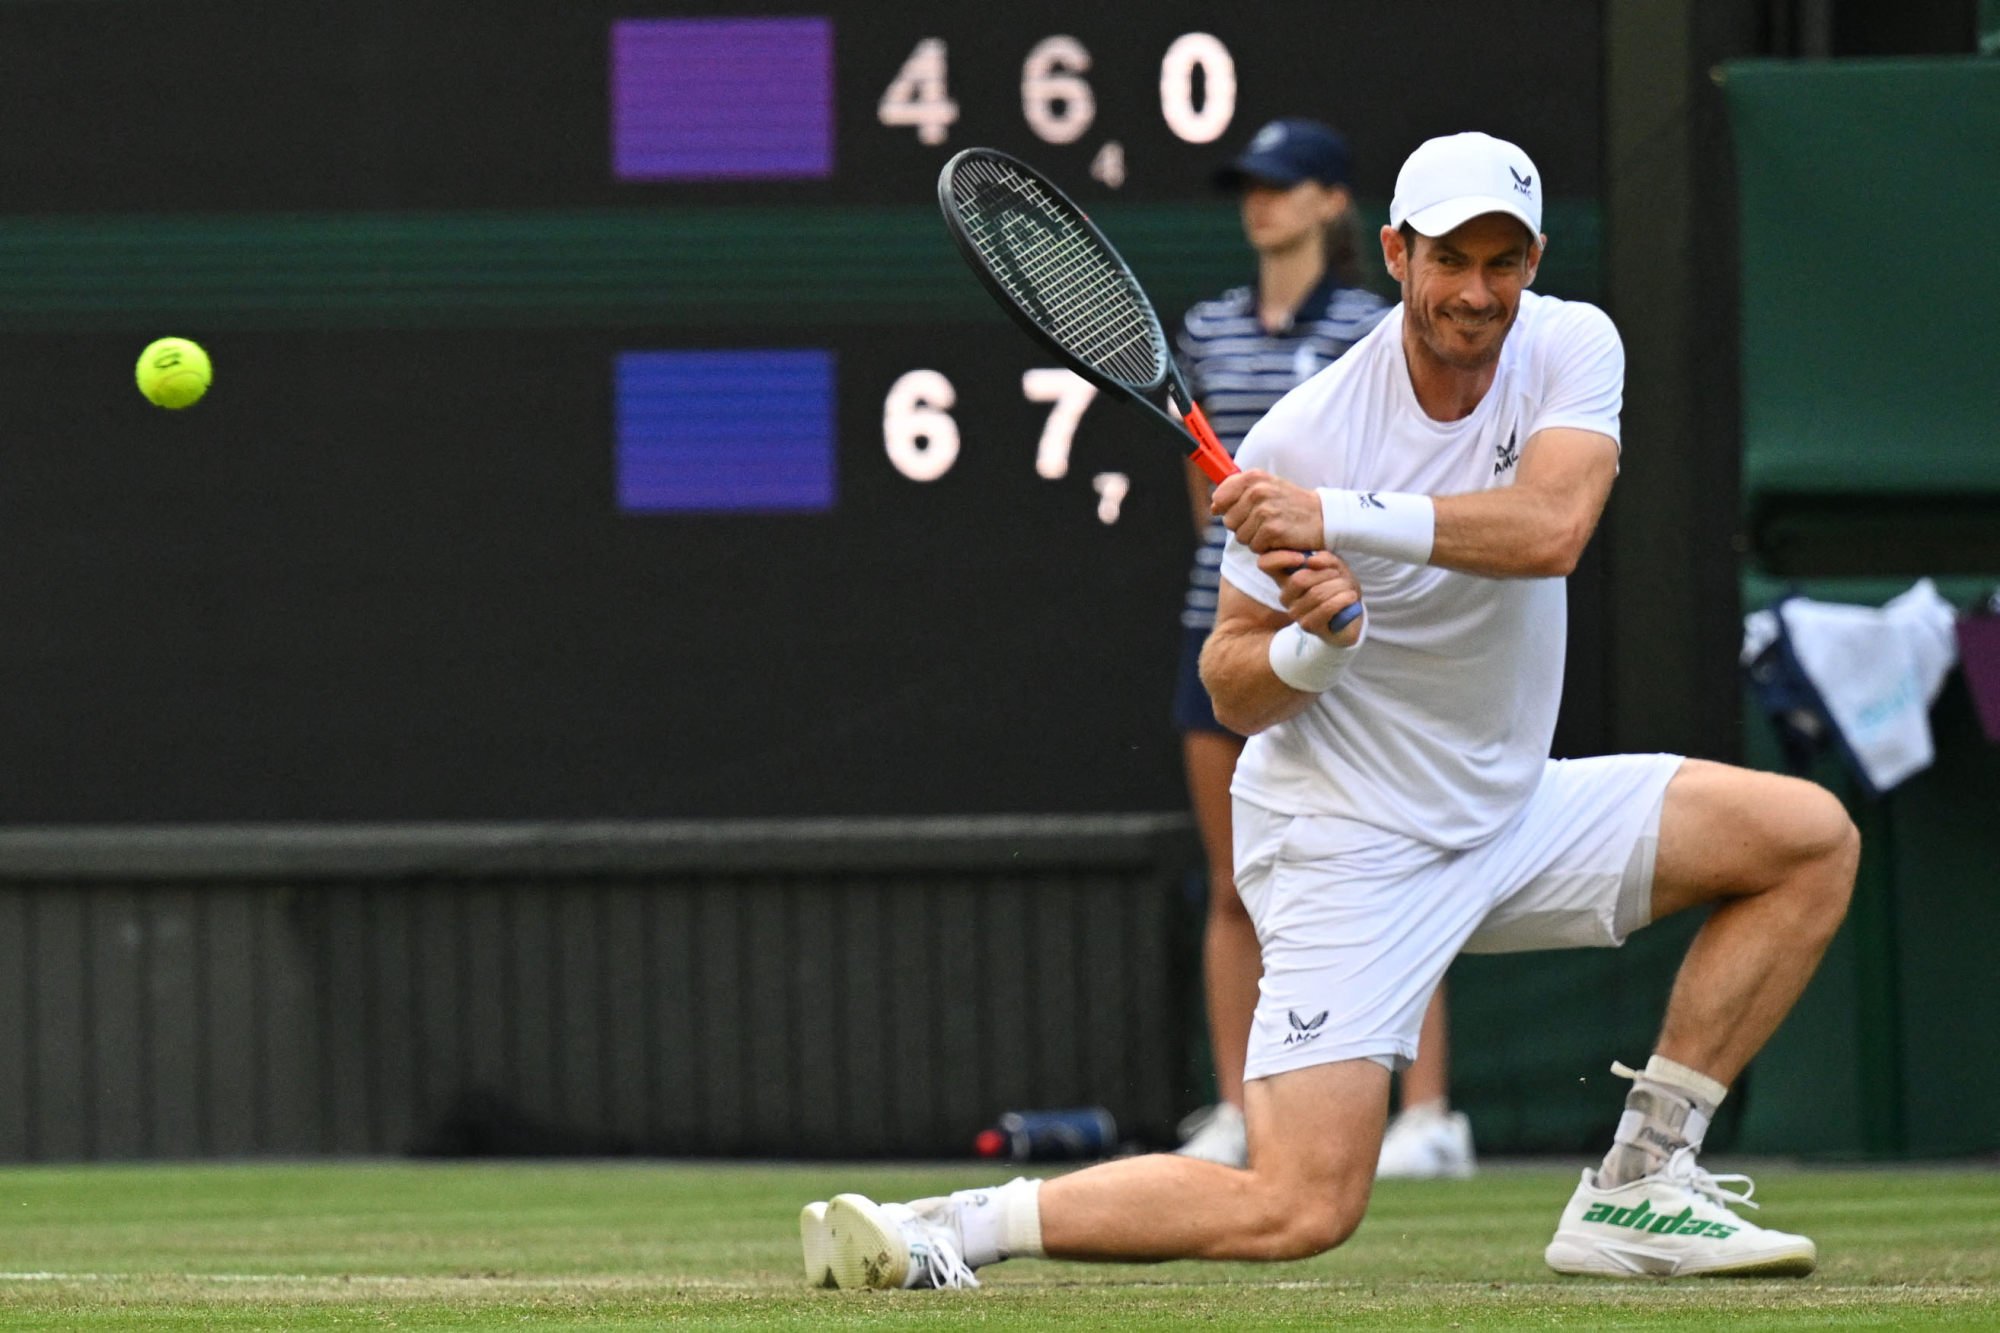 Britain’s Andy Murray (pictured) lost to John Isner of the US in the second round of the men’s singles at this year’s Wimbledon. Photo: AFP